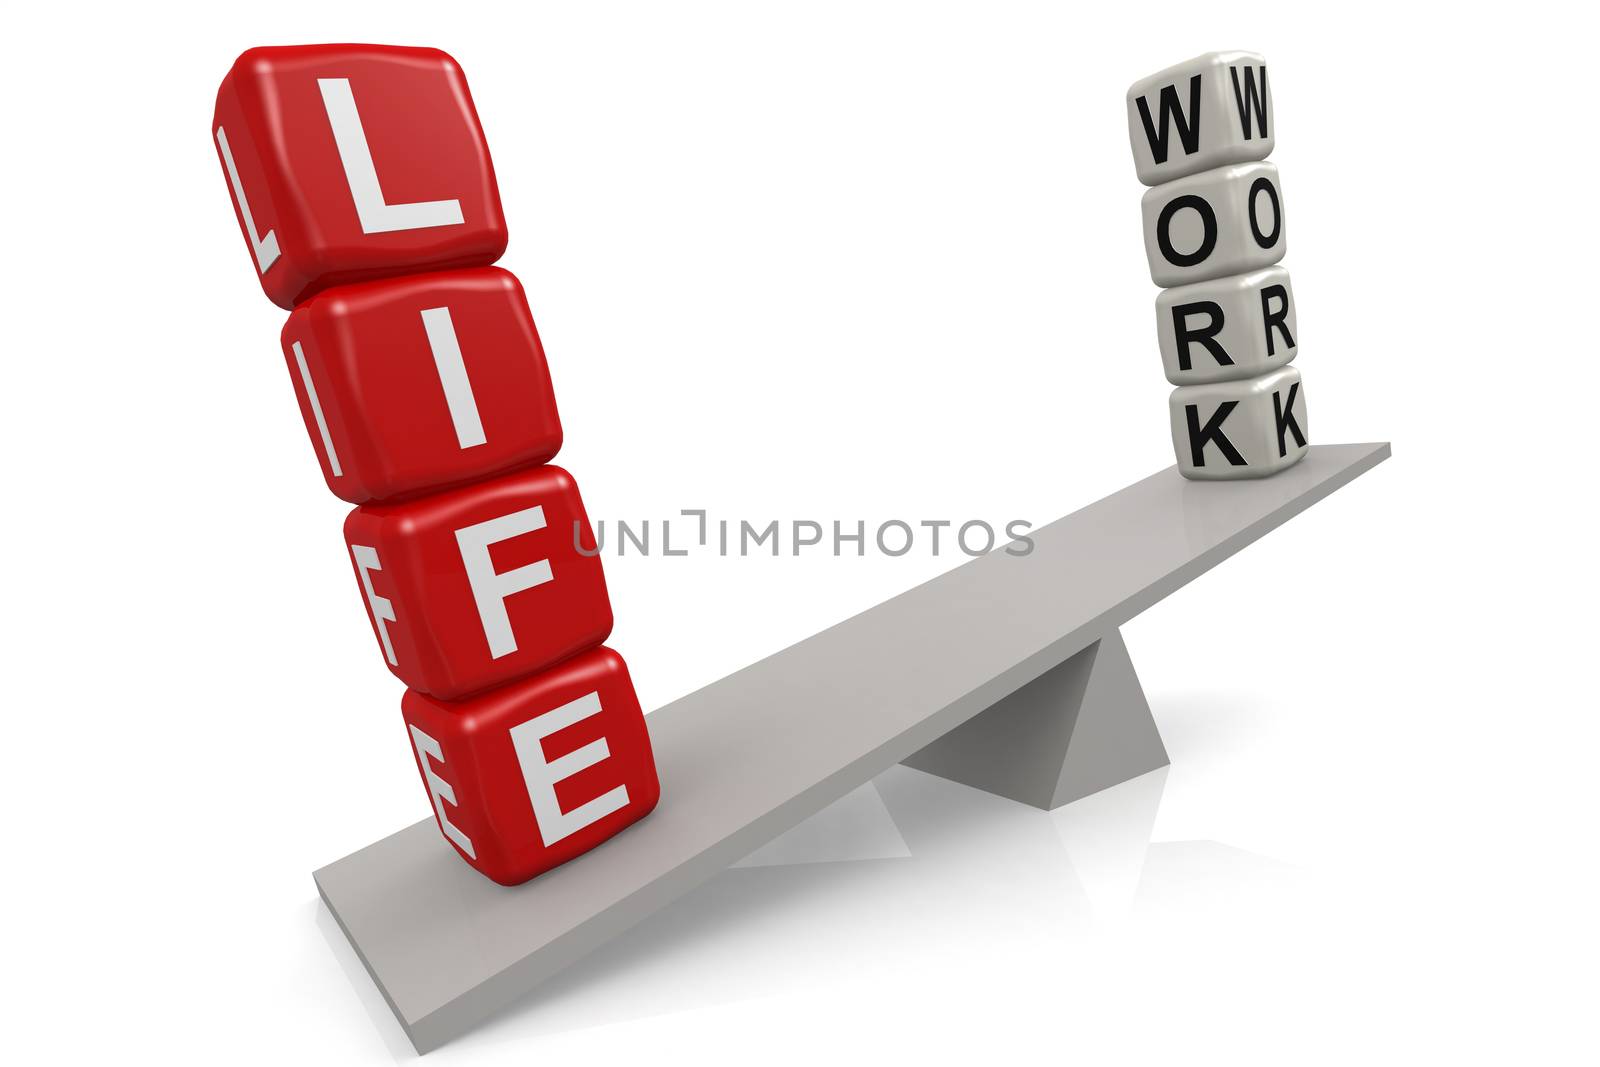 Work and life balance concept by tang90246